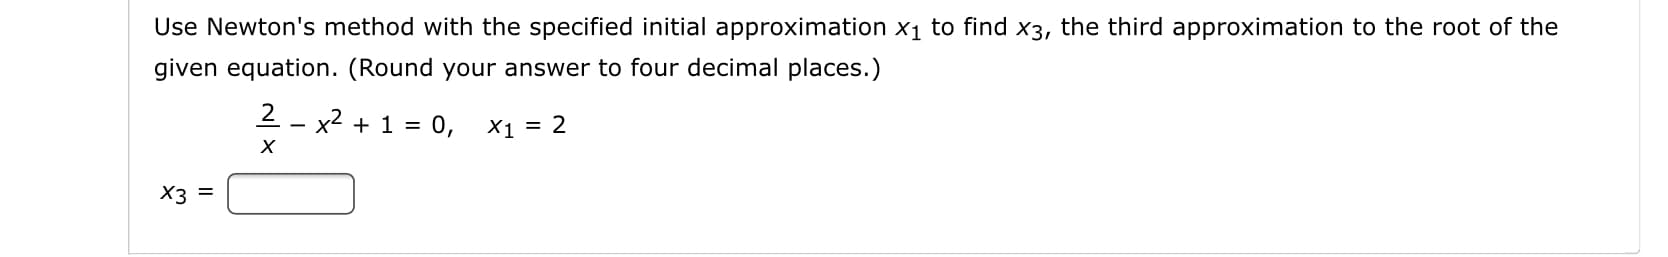 Use Newton's method with the specified initial approximation x1 to find x3, the third approximation to the root of the
given equation. (Round your answer to four decimal places.)
